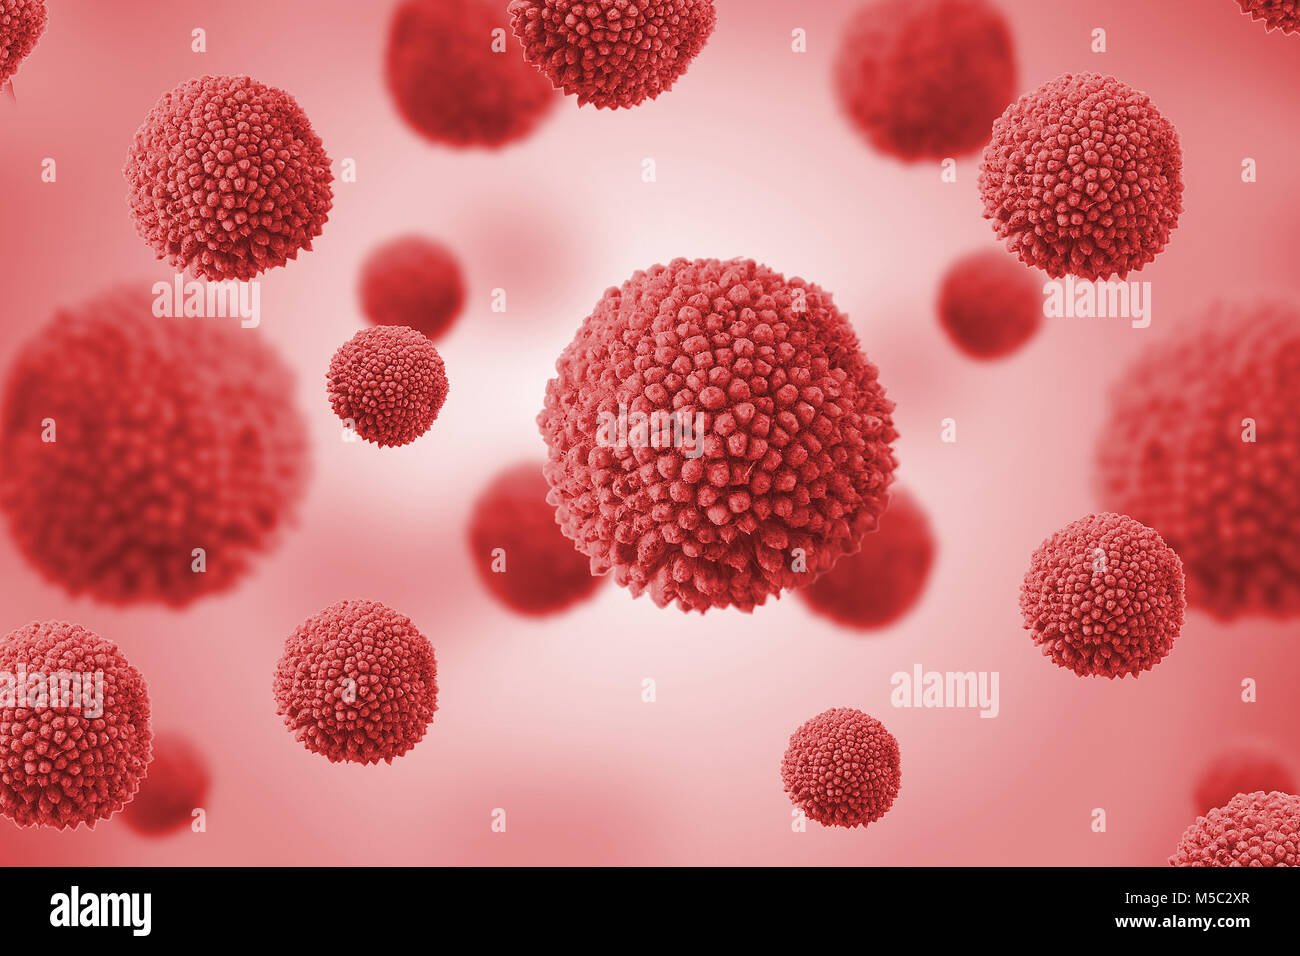 Viruses and pathogens replication and infection in a viral epidemic. Nanobiology background. Stock Photo